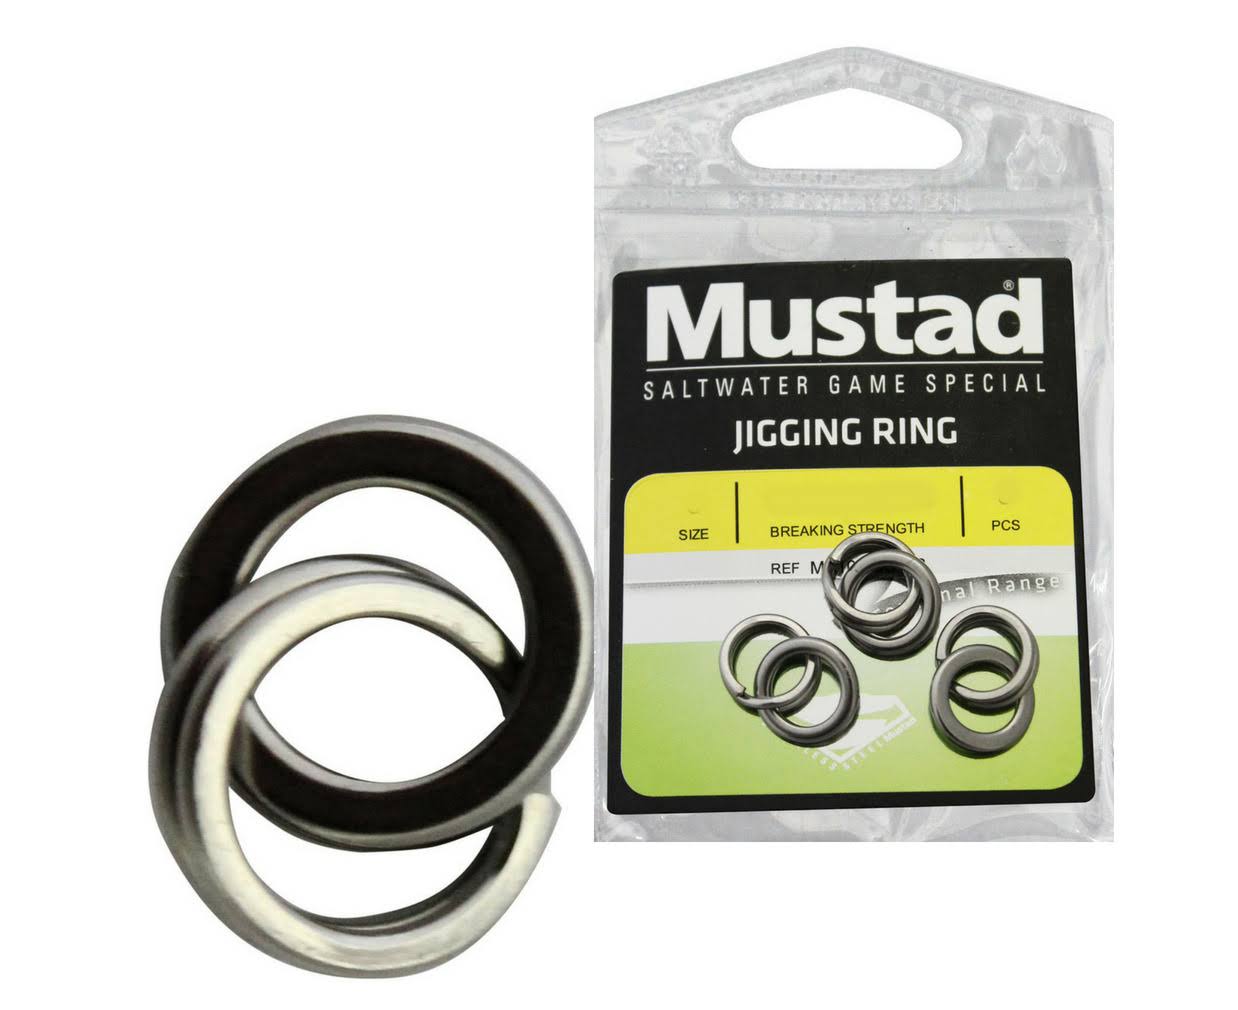 Mustad Stainless Steel Jigging Rings Size 7 92lb/42Kilo 5pcs/pkt for Fishing Lures